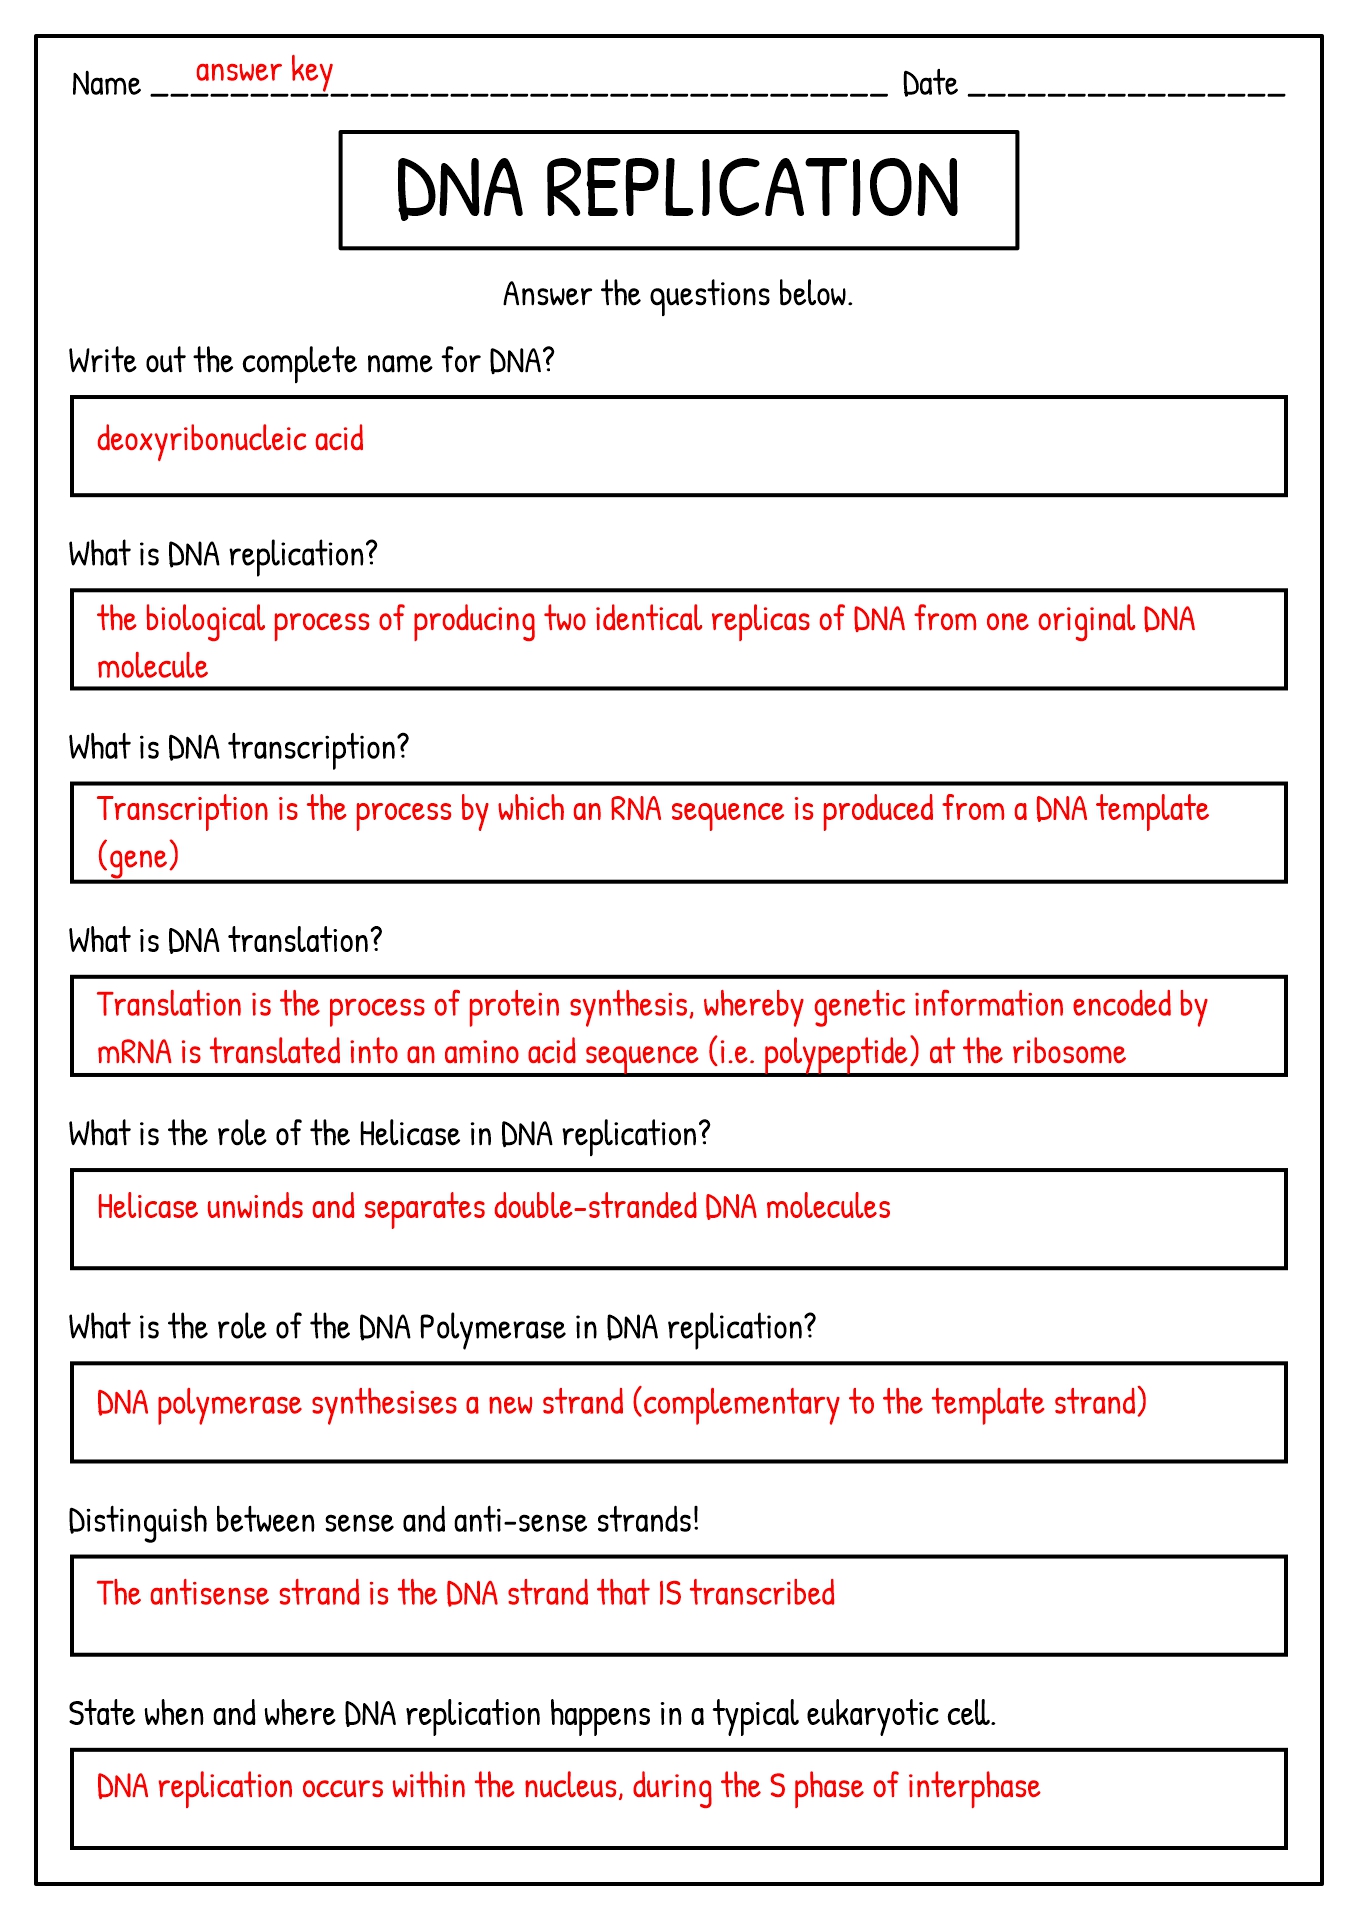 DNA Replication Worksheet Answers